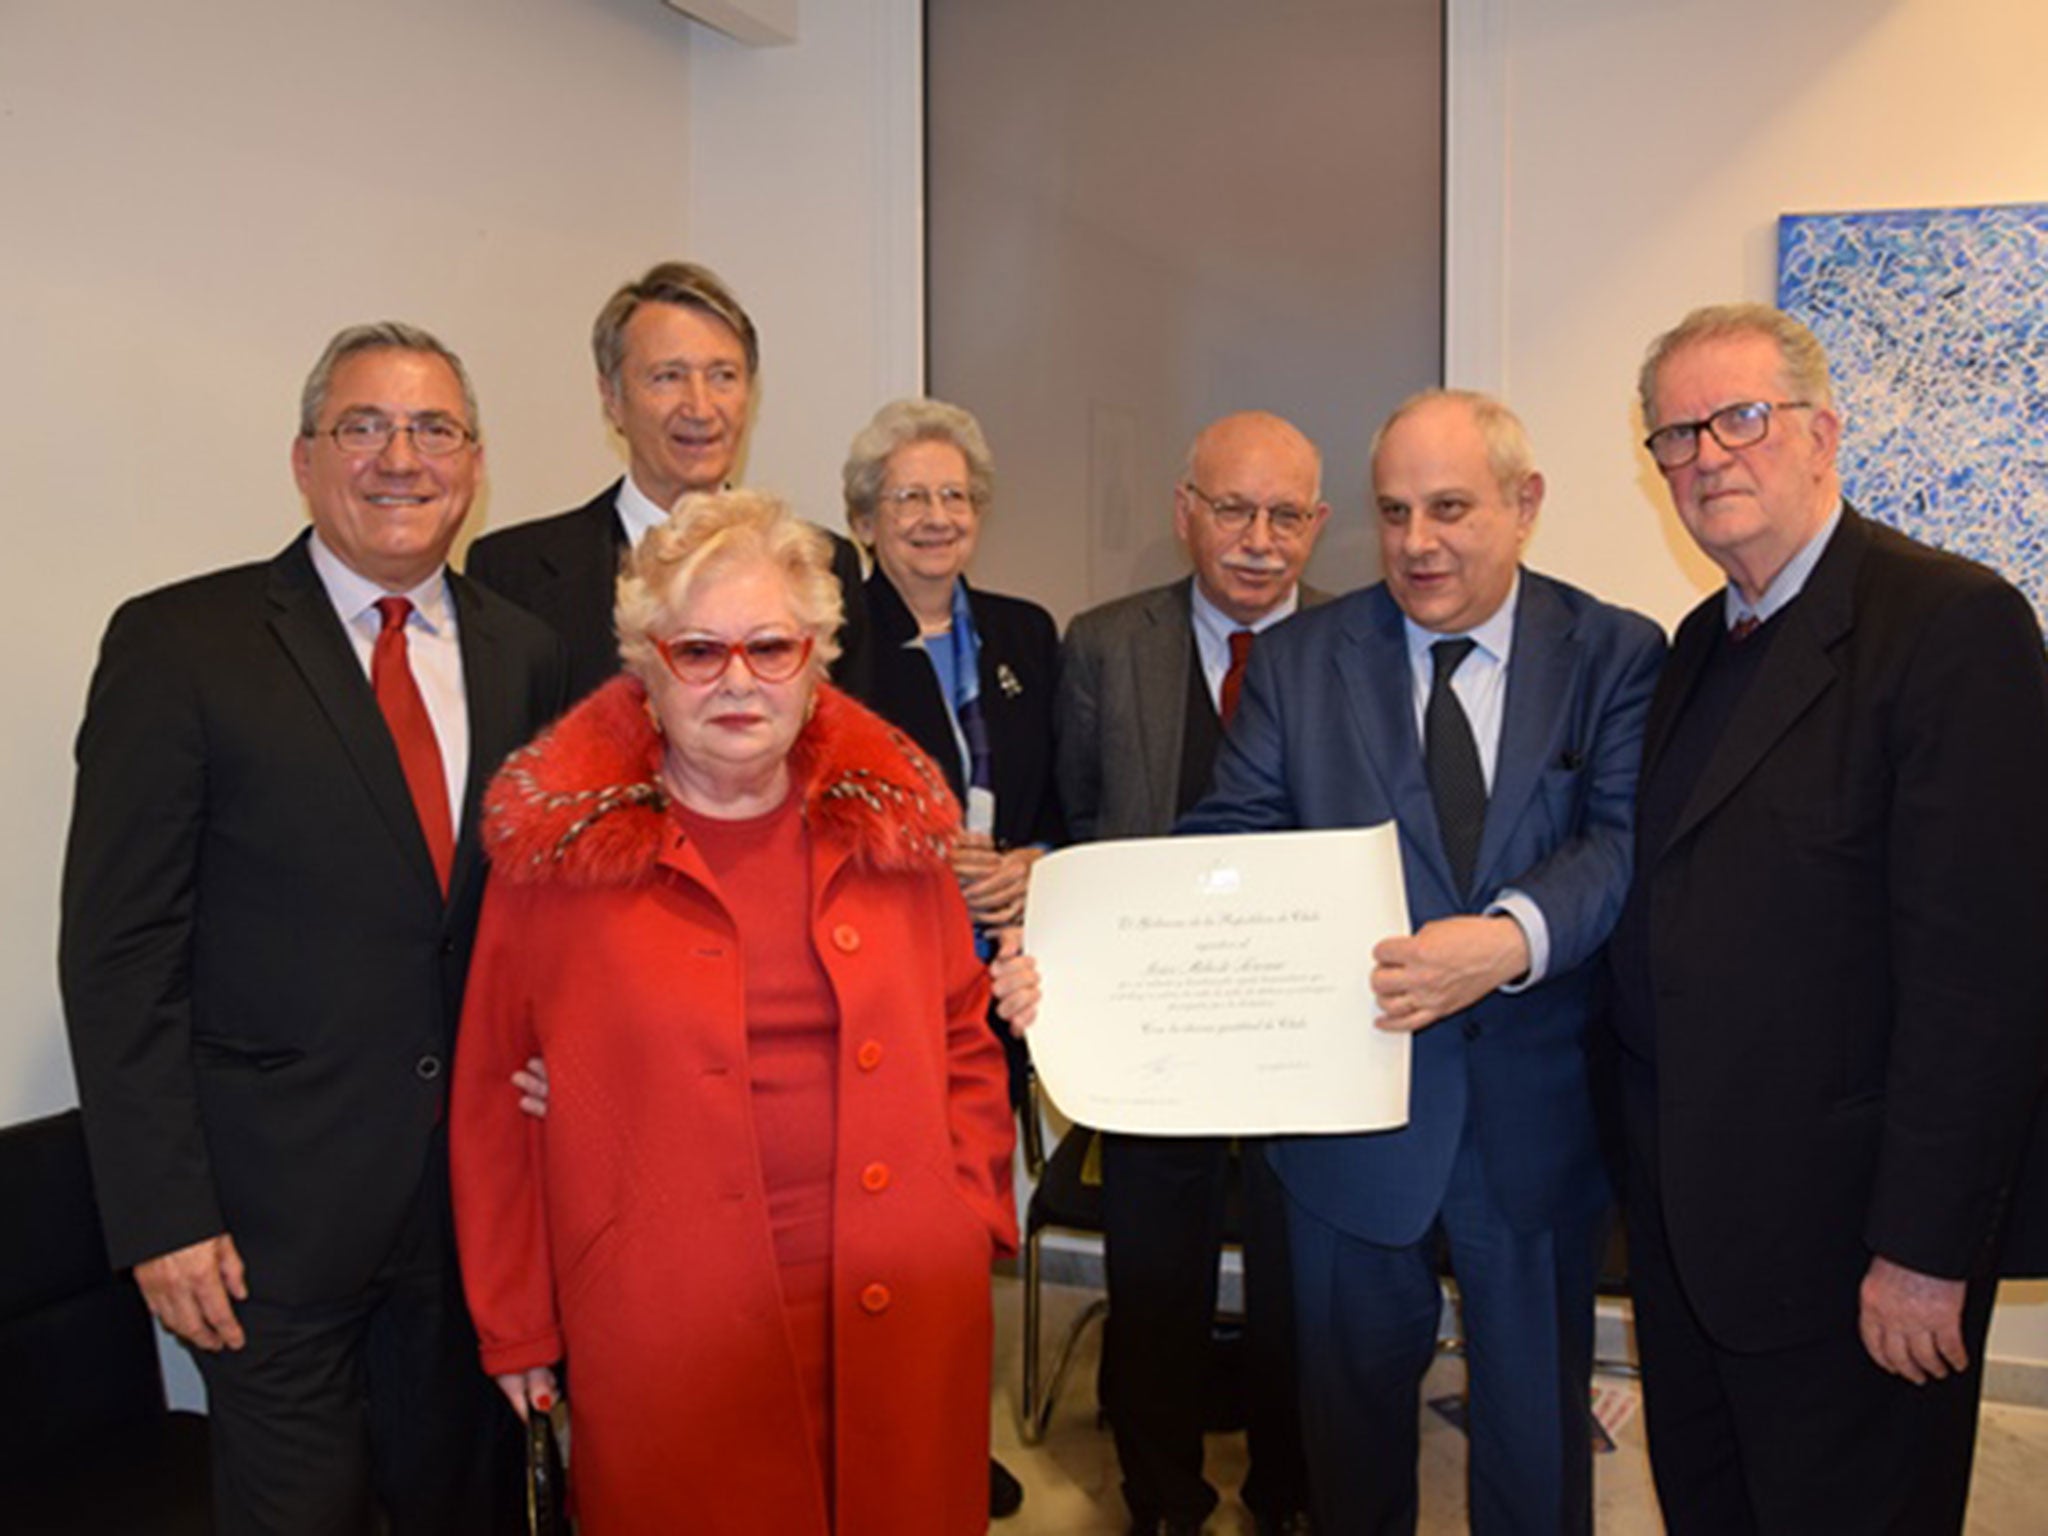 (In red, then left to right) Anna Sofia de Vergottini, the widow of the former ambassador, diplomats Elena Piaciotti, Roberto Toscano, Emilio Barbarani and other officials are honoured by Chile in Rome